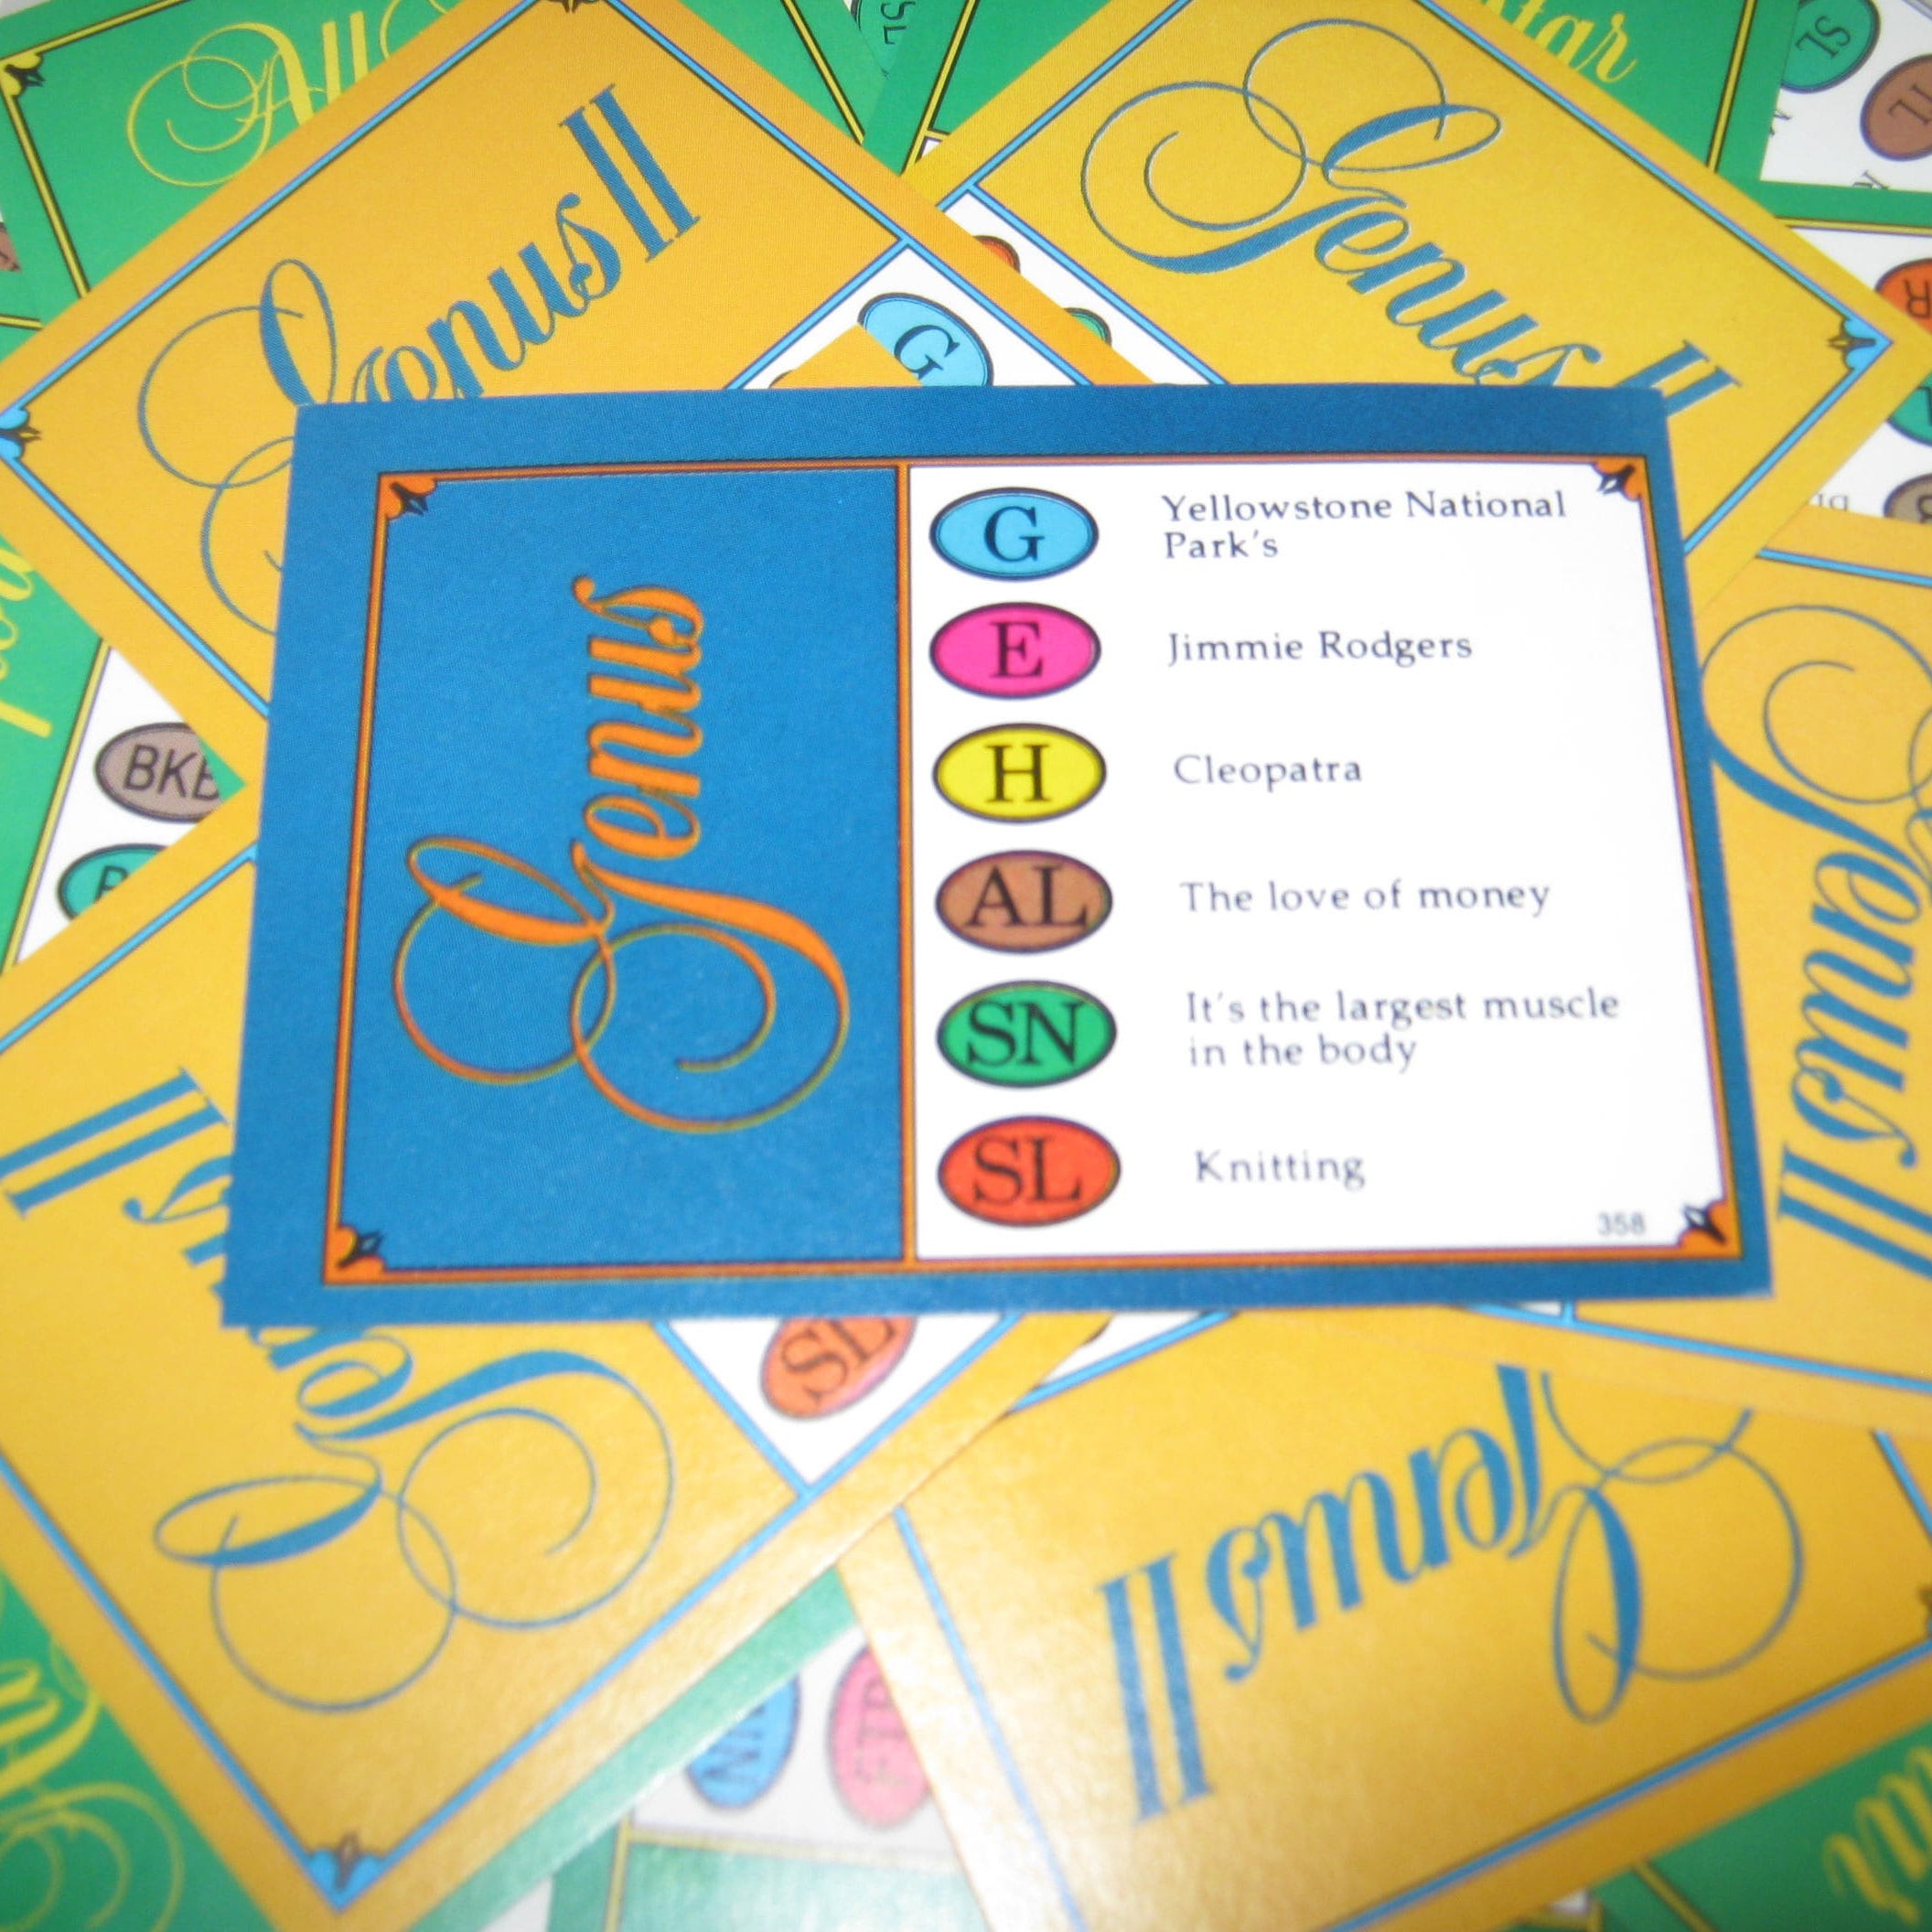 1200 Trivial Pursuit Trivia Cards You Pick 12 decks of 100 Family Game Night 